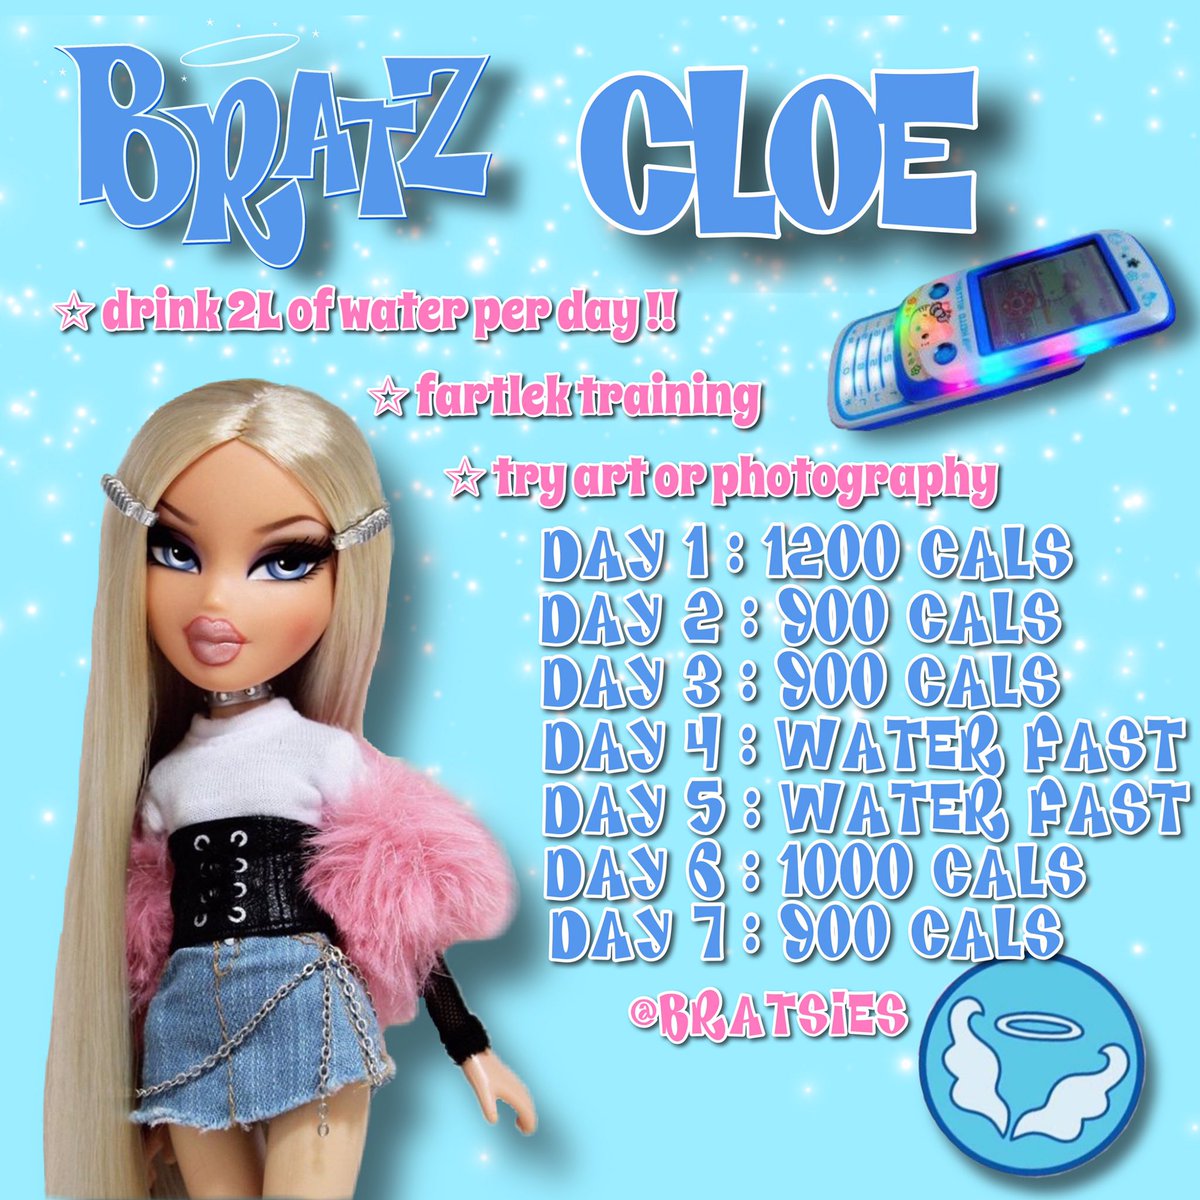 ★ CLOE :: - cloe’s fave food is pizza so i thought a low restriction diet would be best with a couple days of water fasting :)